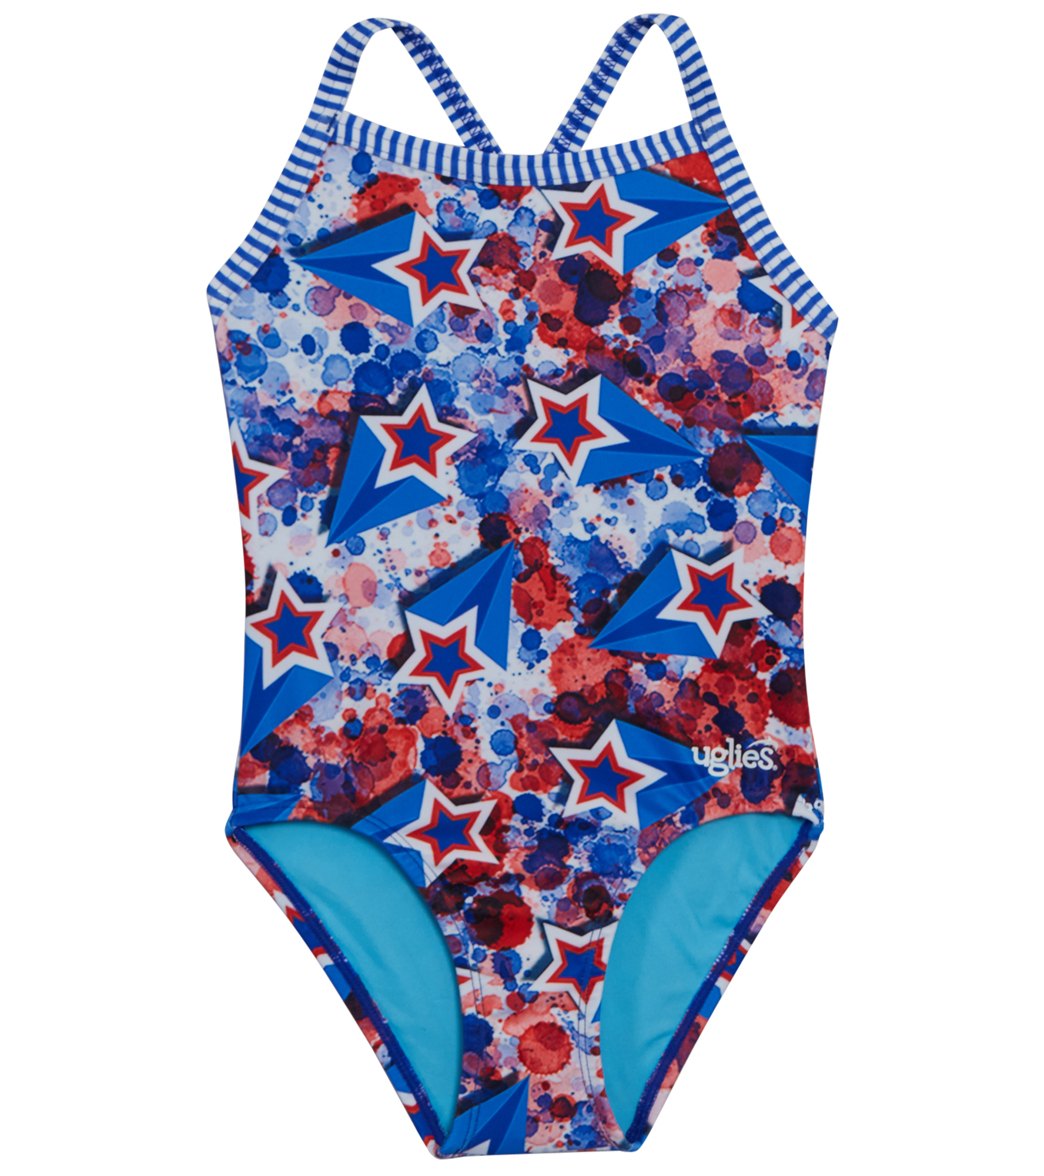 Dolfin Girls' Uglies Liberty One Piece Swimsuit at SwimOutlet.com